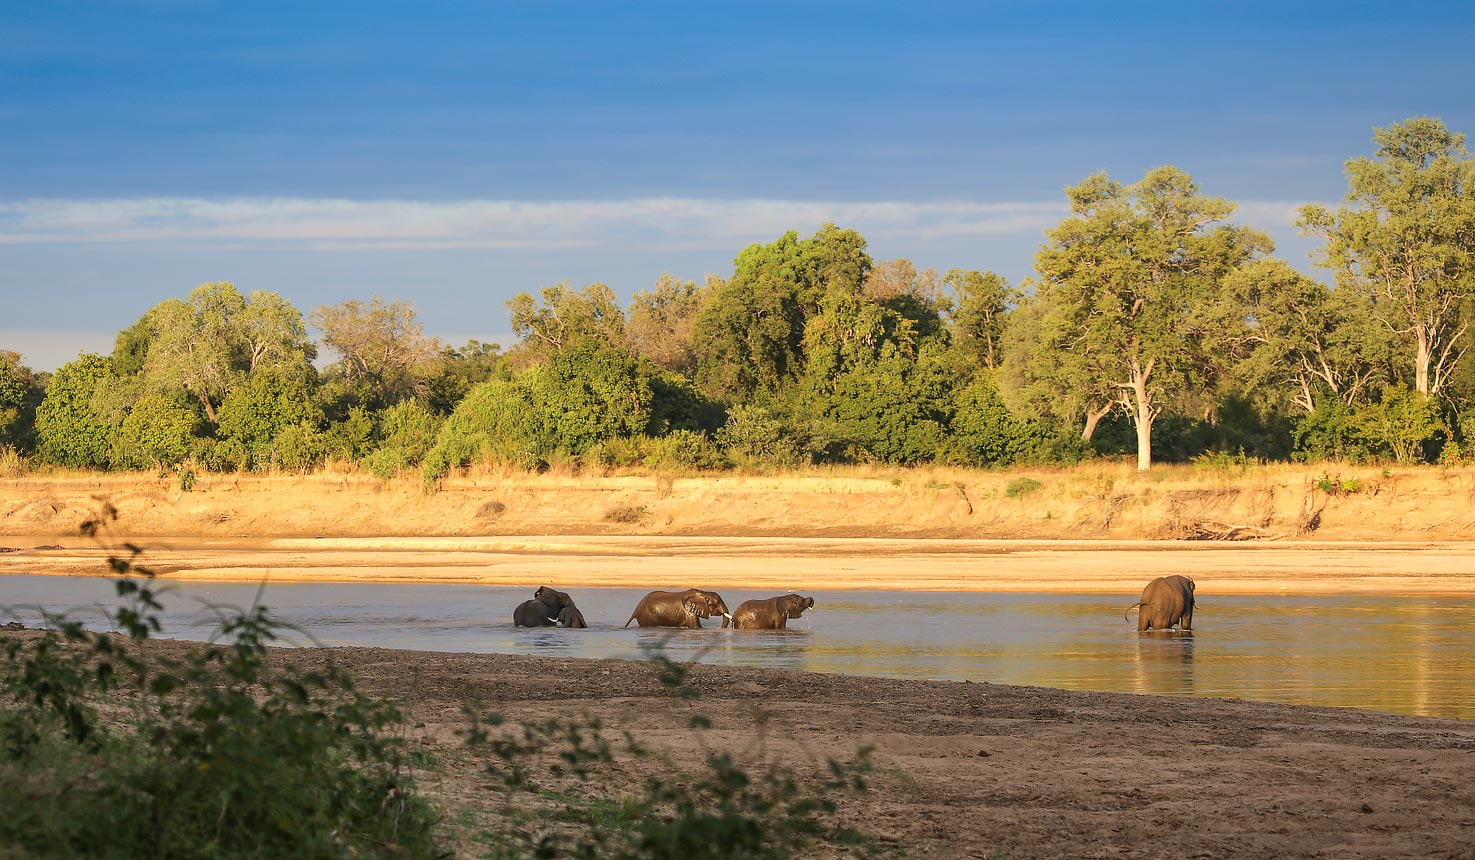 Day 1 to Day 4 - Luangwa River Camp in South Luangwa